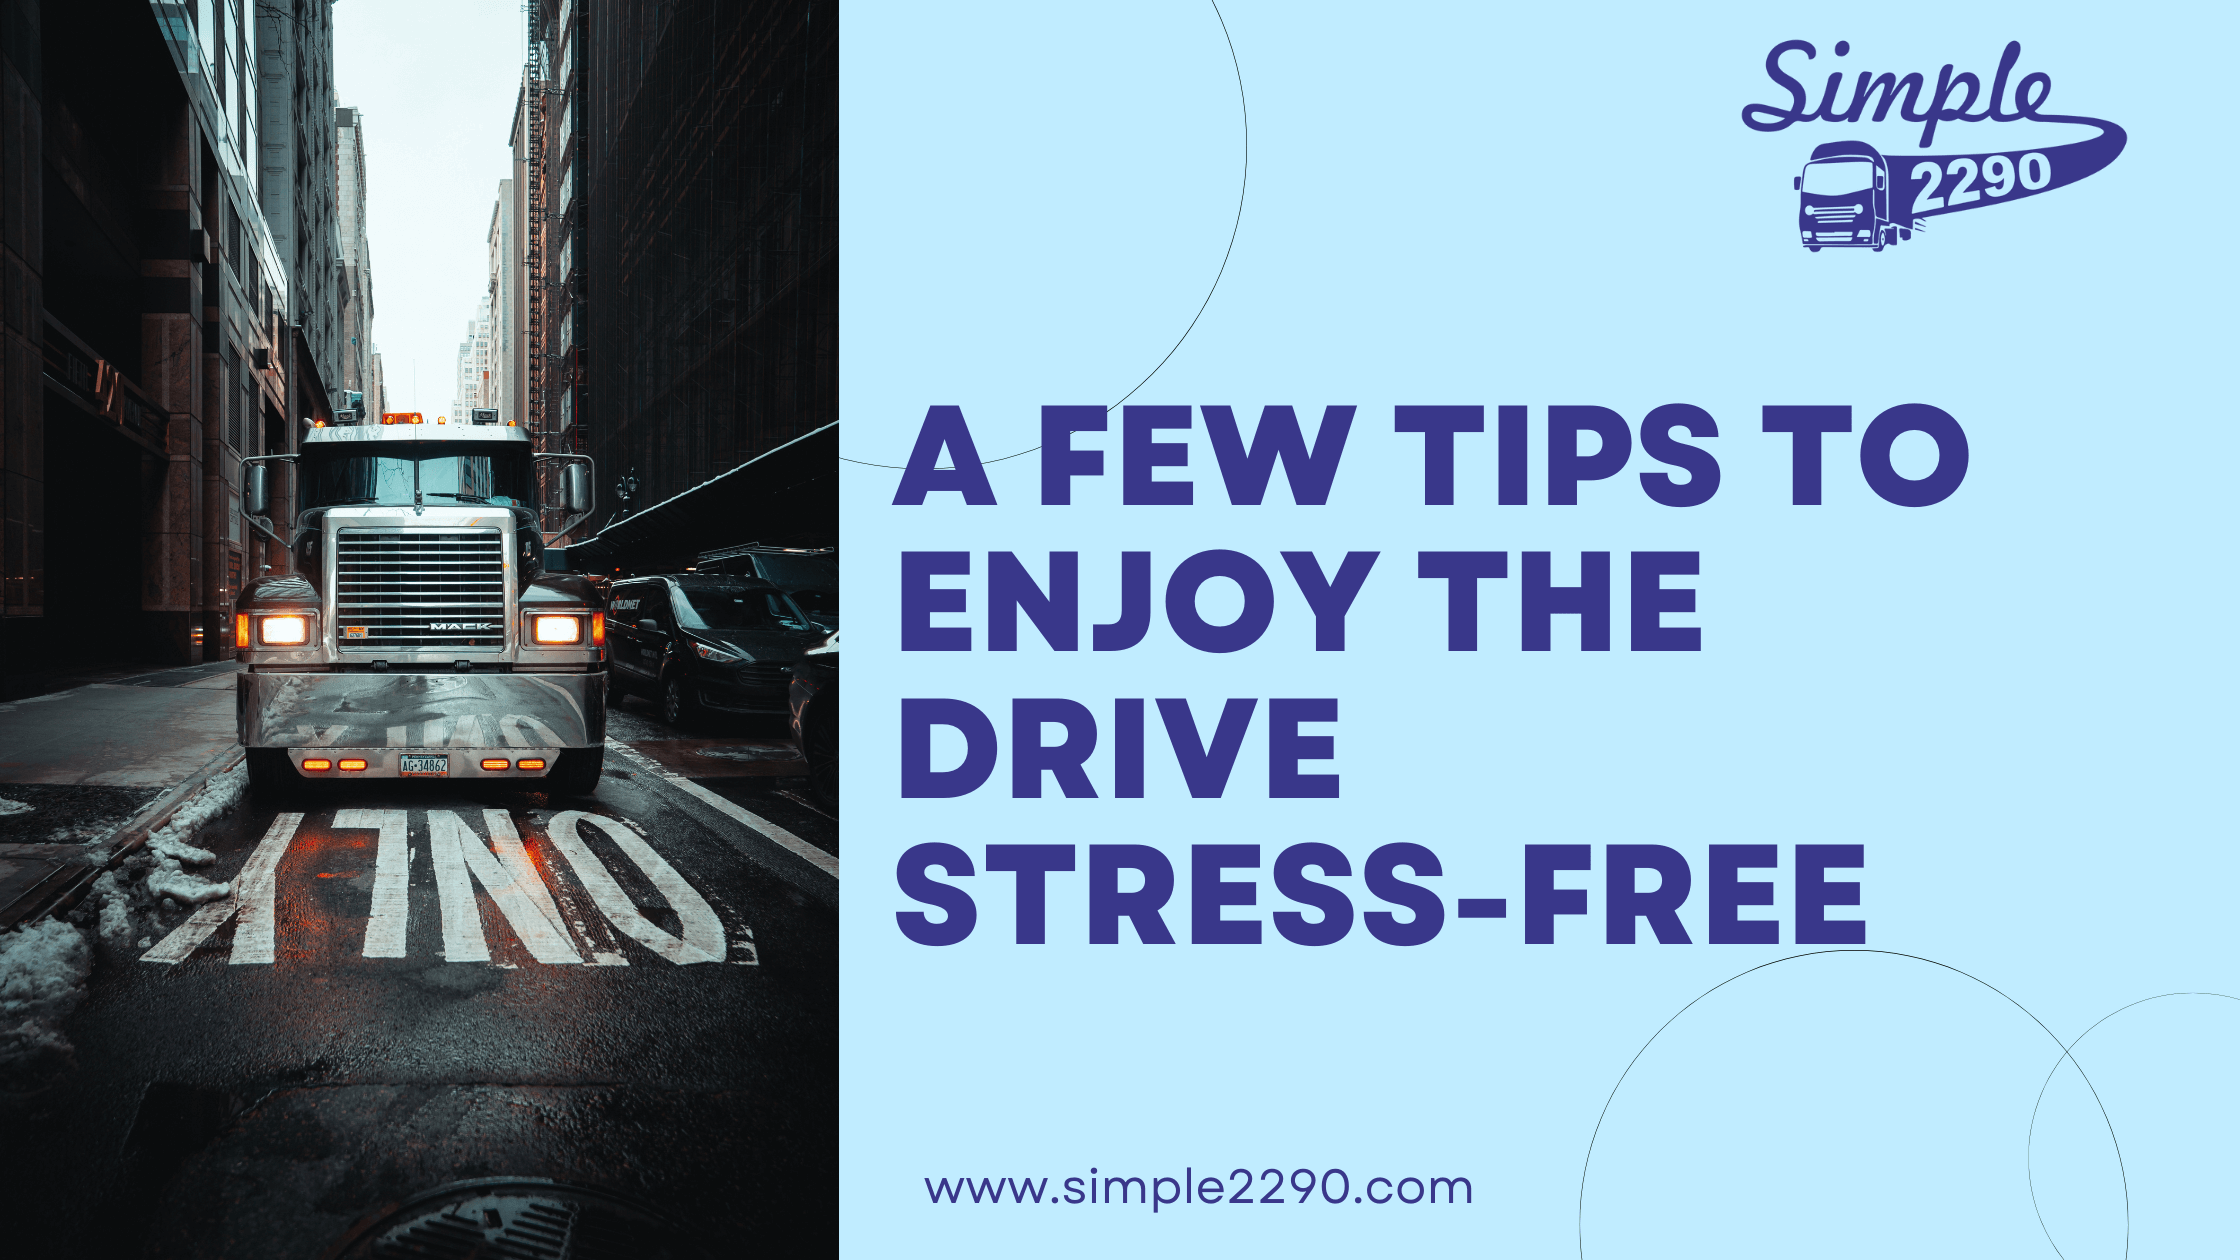 A few tips to enjoy the drive stress-free